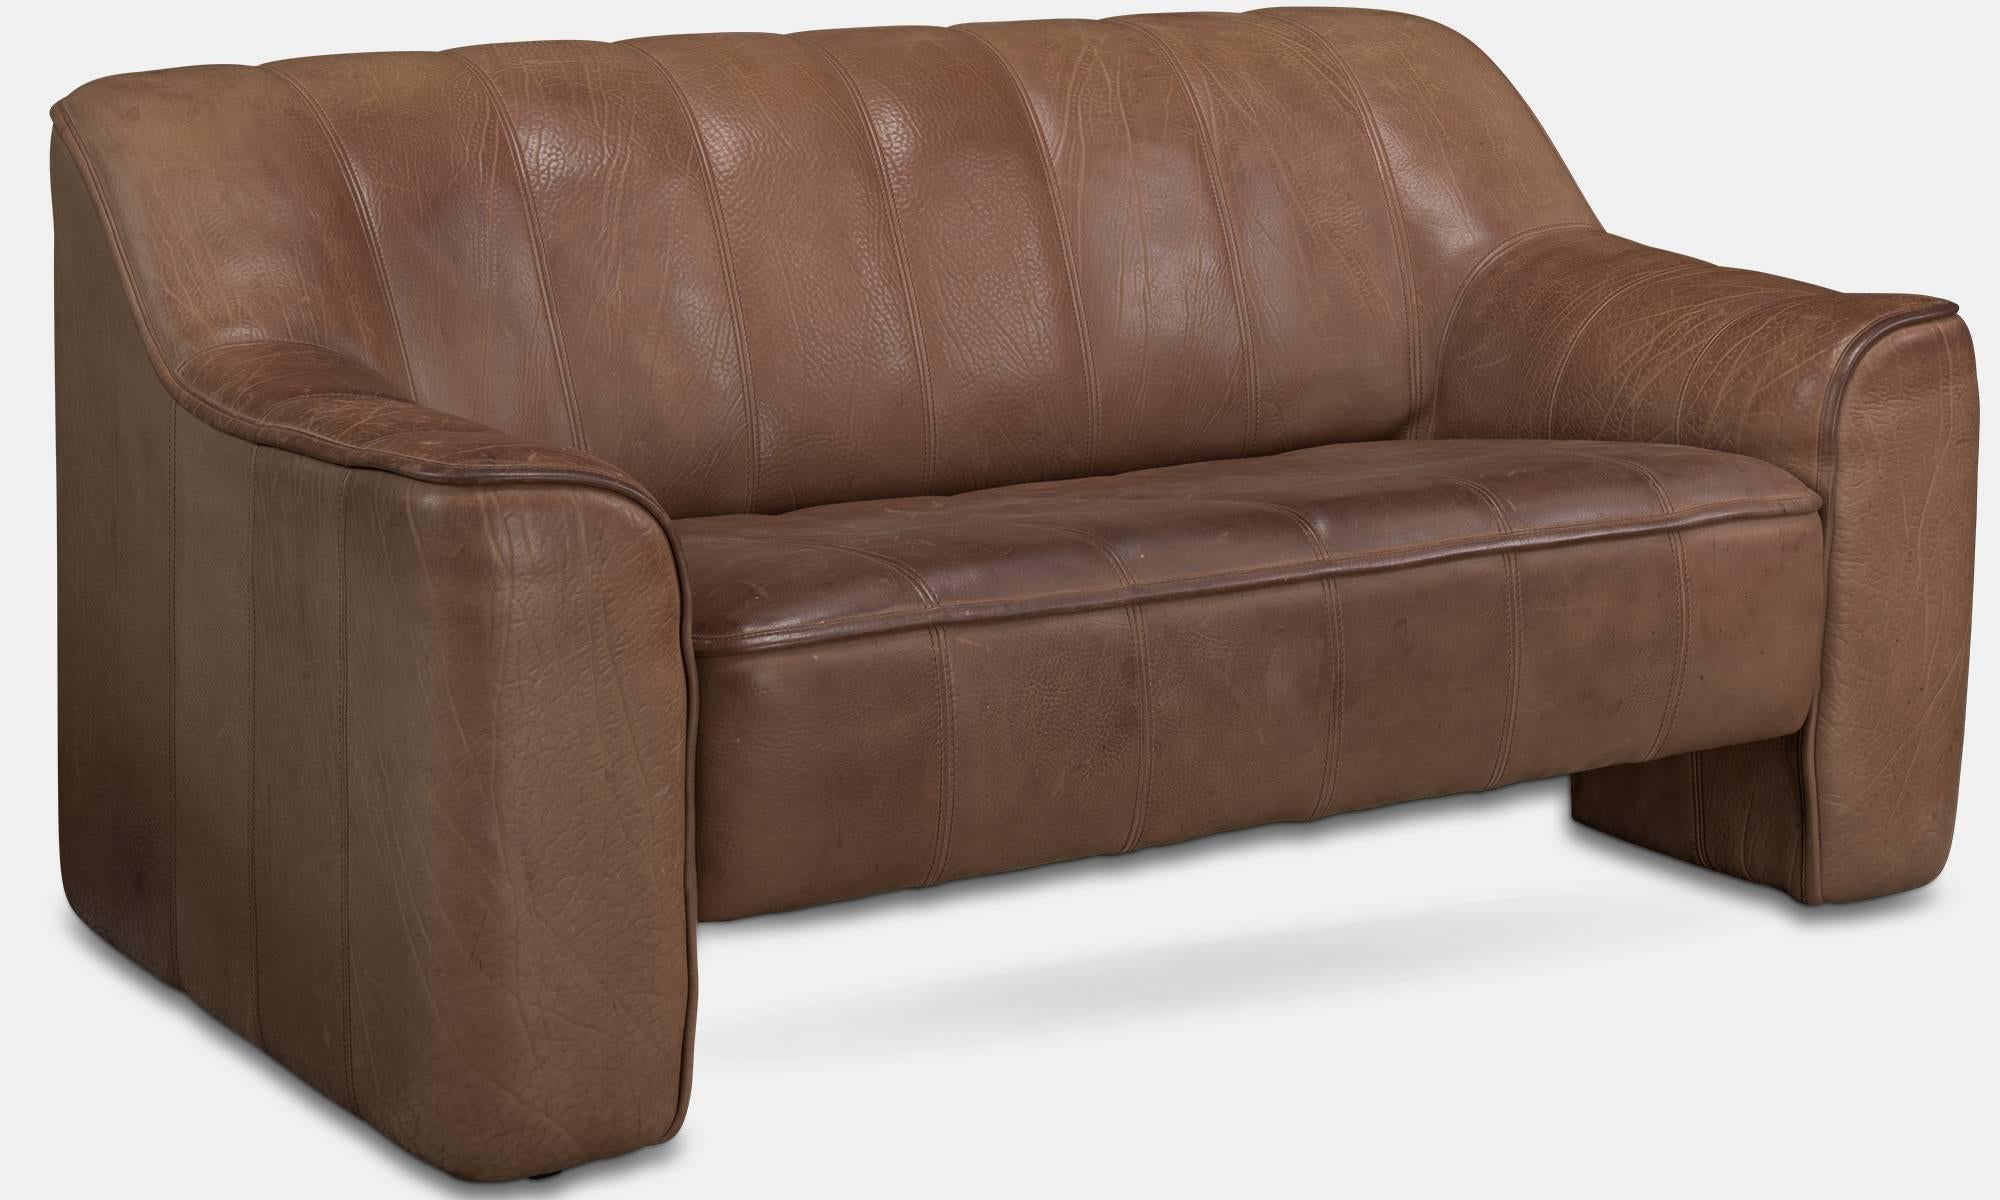 De Sede Leather Loveseat, circa 1970

Model DS-44 two-seat sofa with original buffalo leather and solid wood frame.